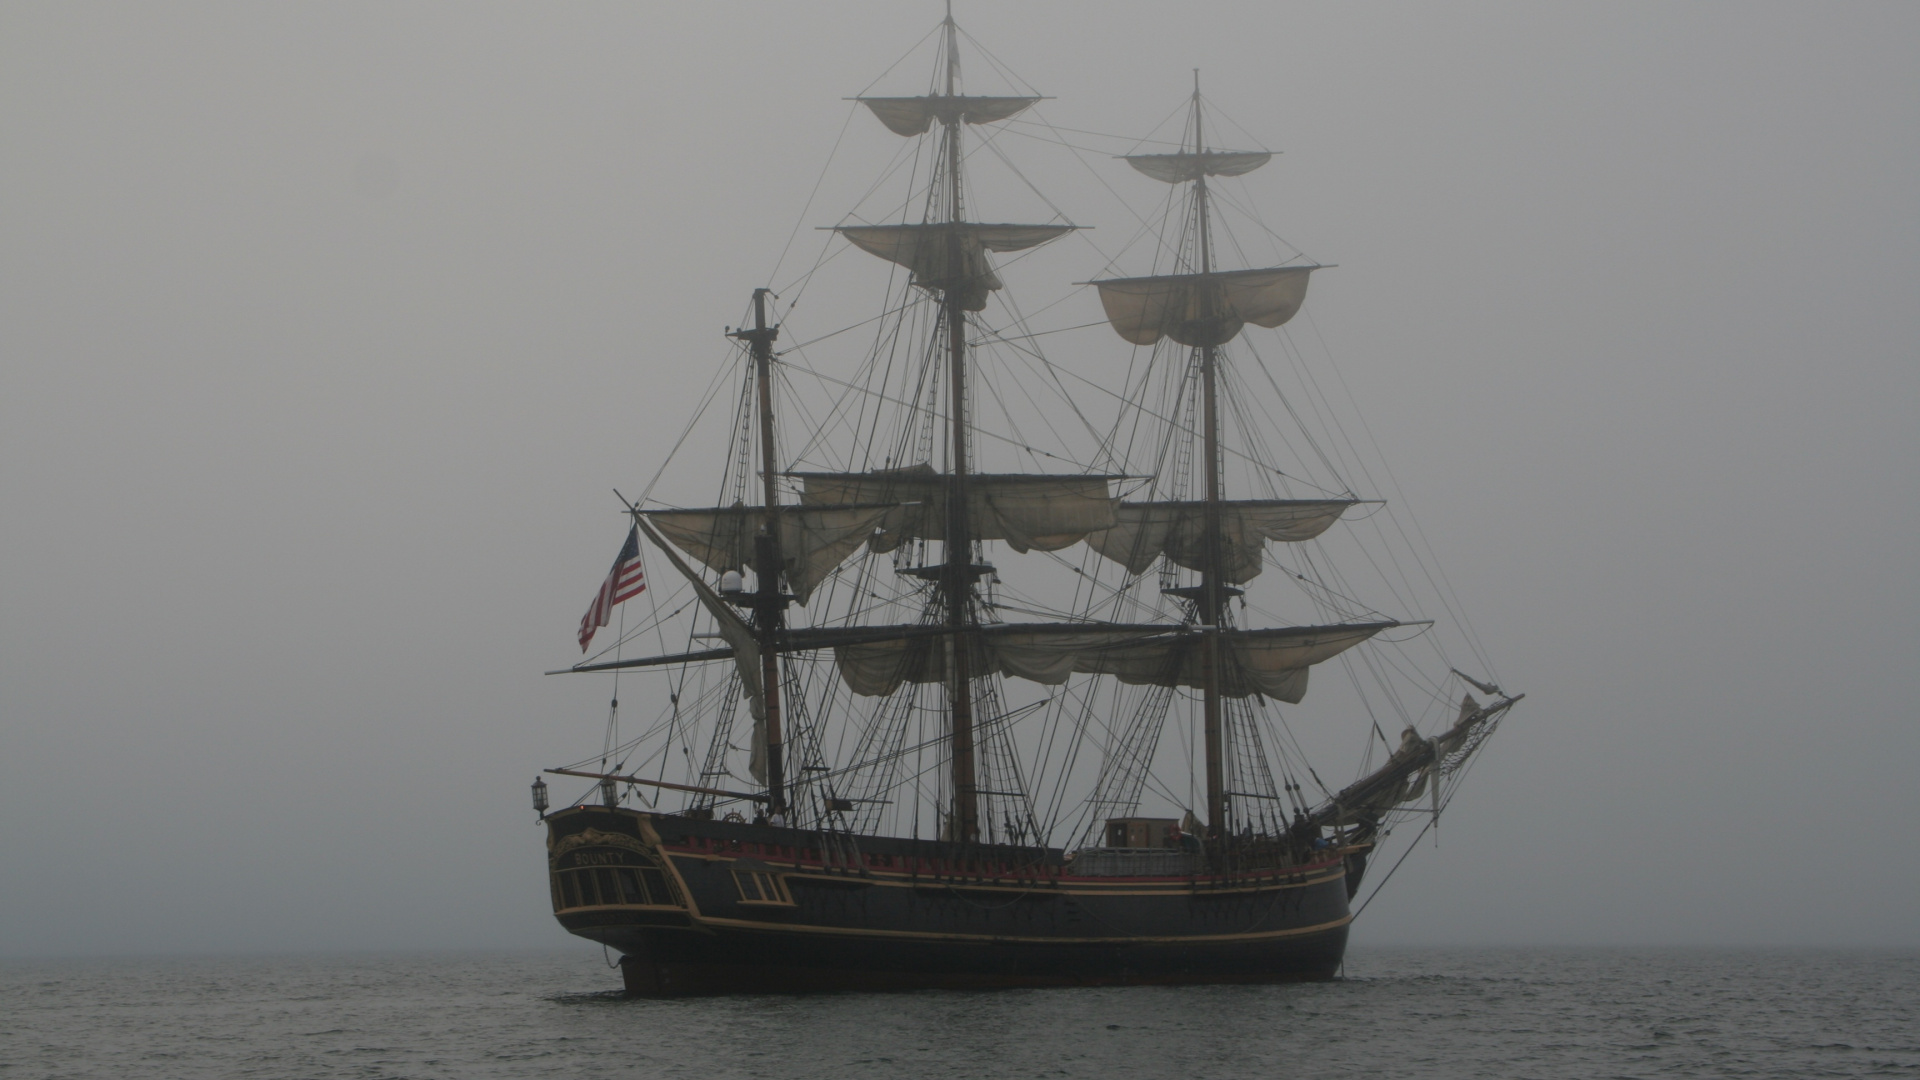 Brown and White Galleon Ship on Sea During Daytime. Wallpaper in 1920x1080 Resolution